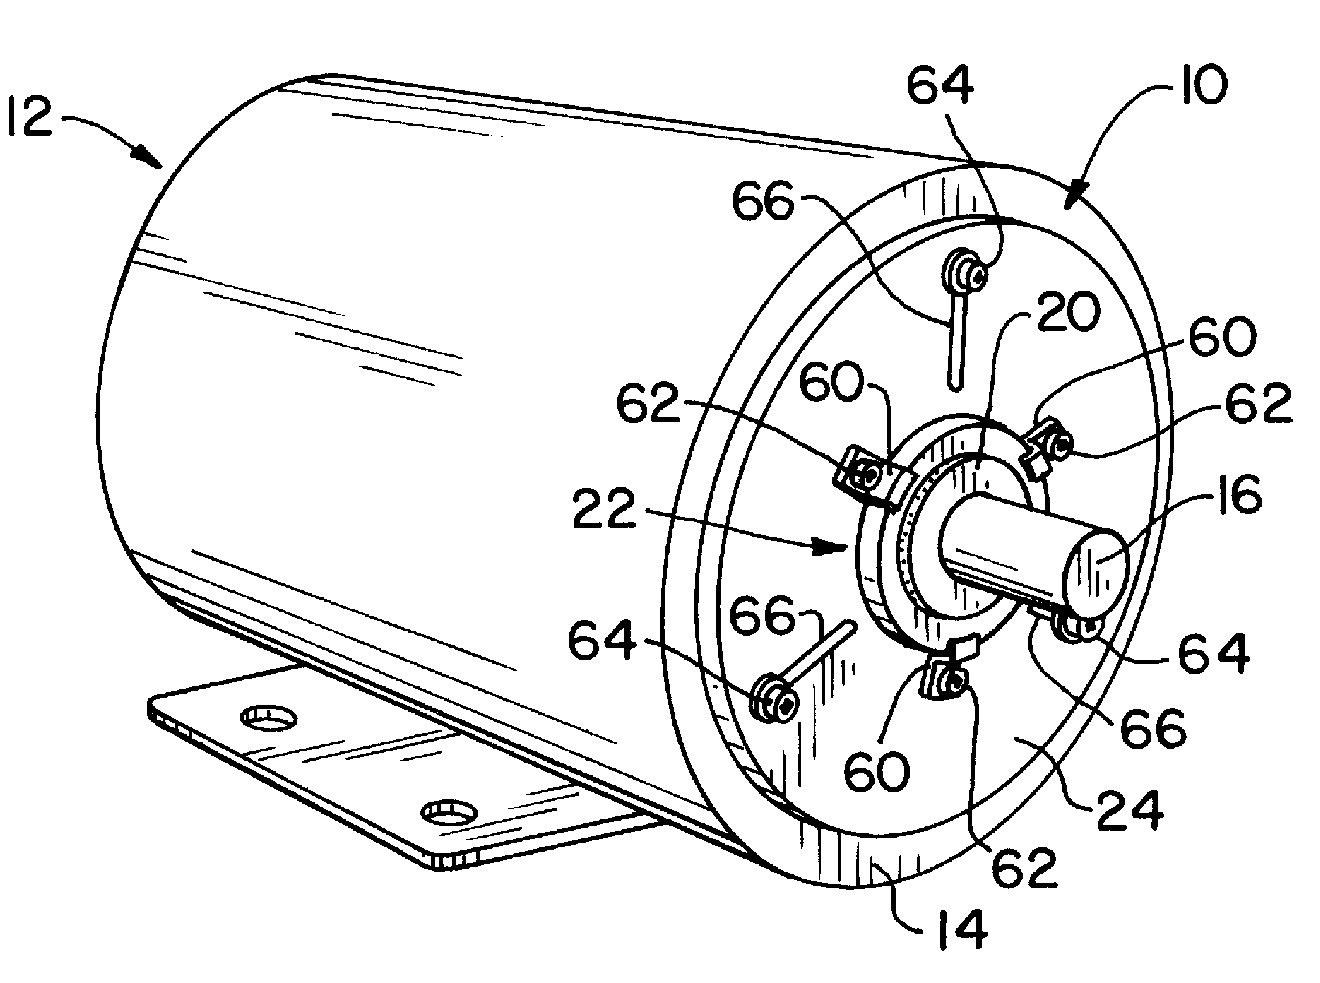 Grounding brush system for mitigating electrical current on rotating shafts